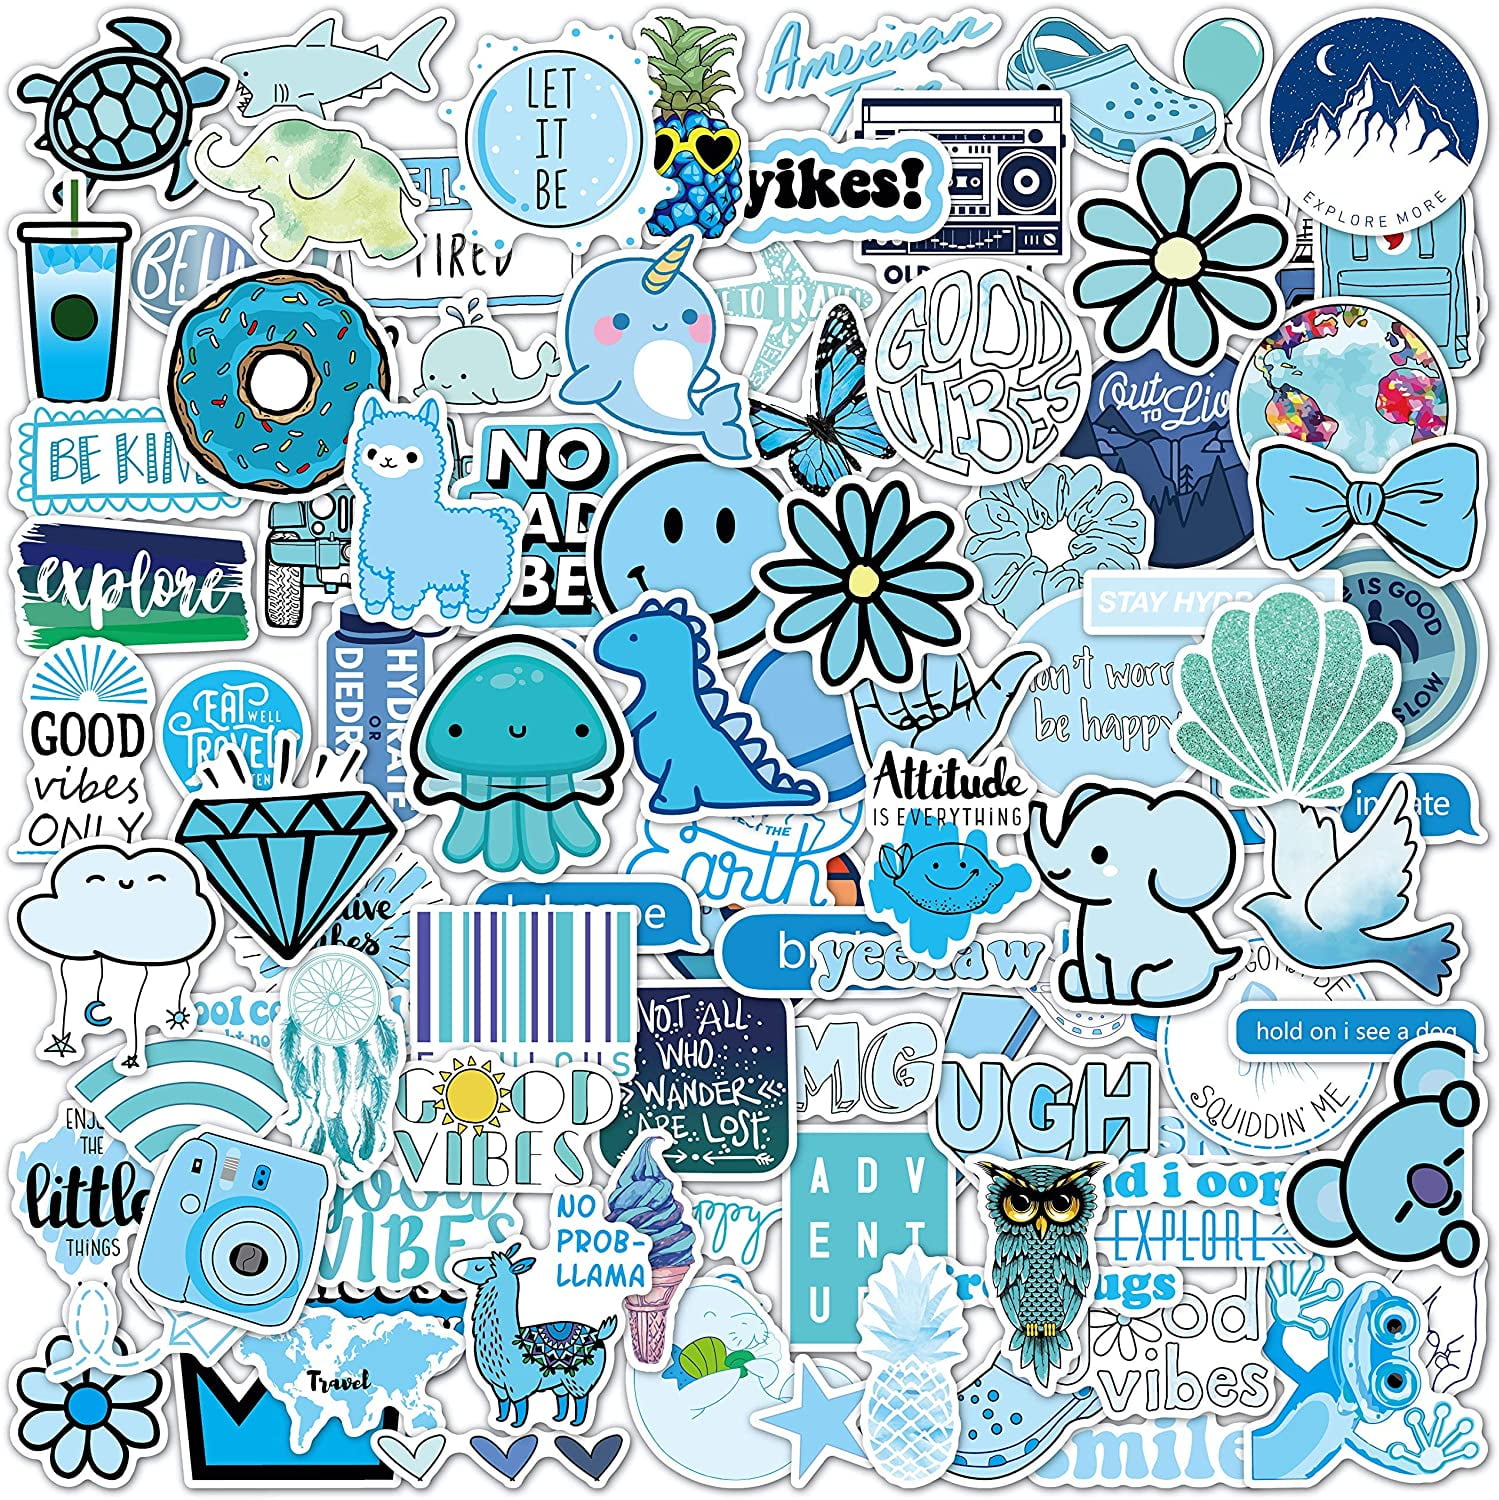 300 Pcs Stickers Pack (50-850Pcs/Pack), Colorful Vsco Waterproof Stickers, Cute Aesthetic stickers. Laptop, Water Bottle, Phone, Skateboard Stickers